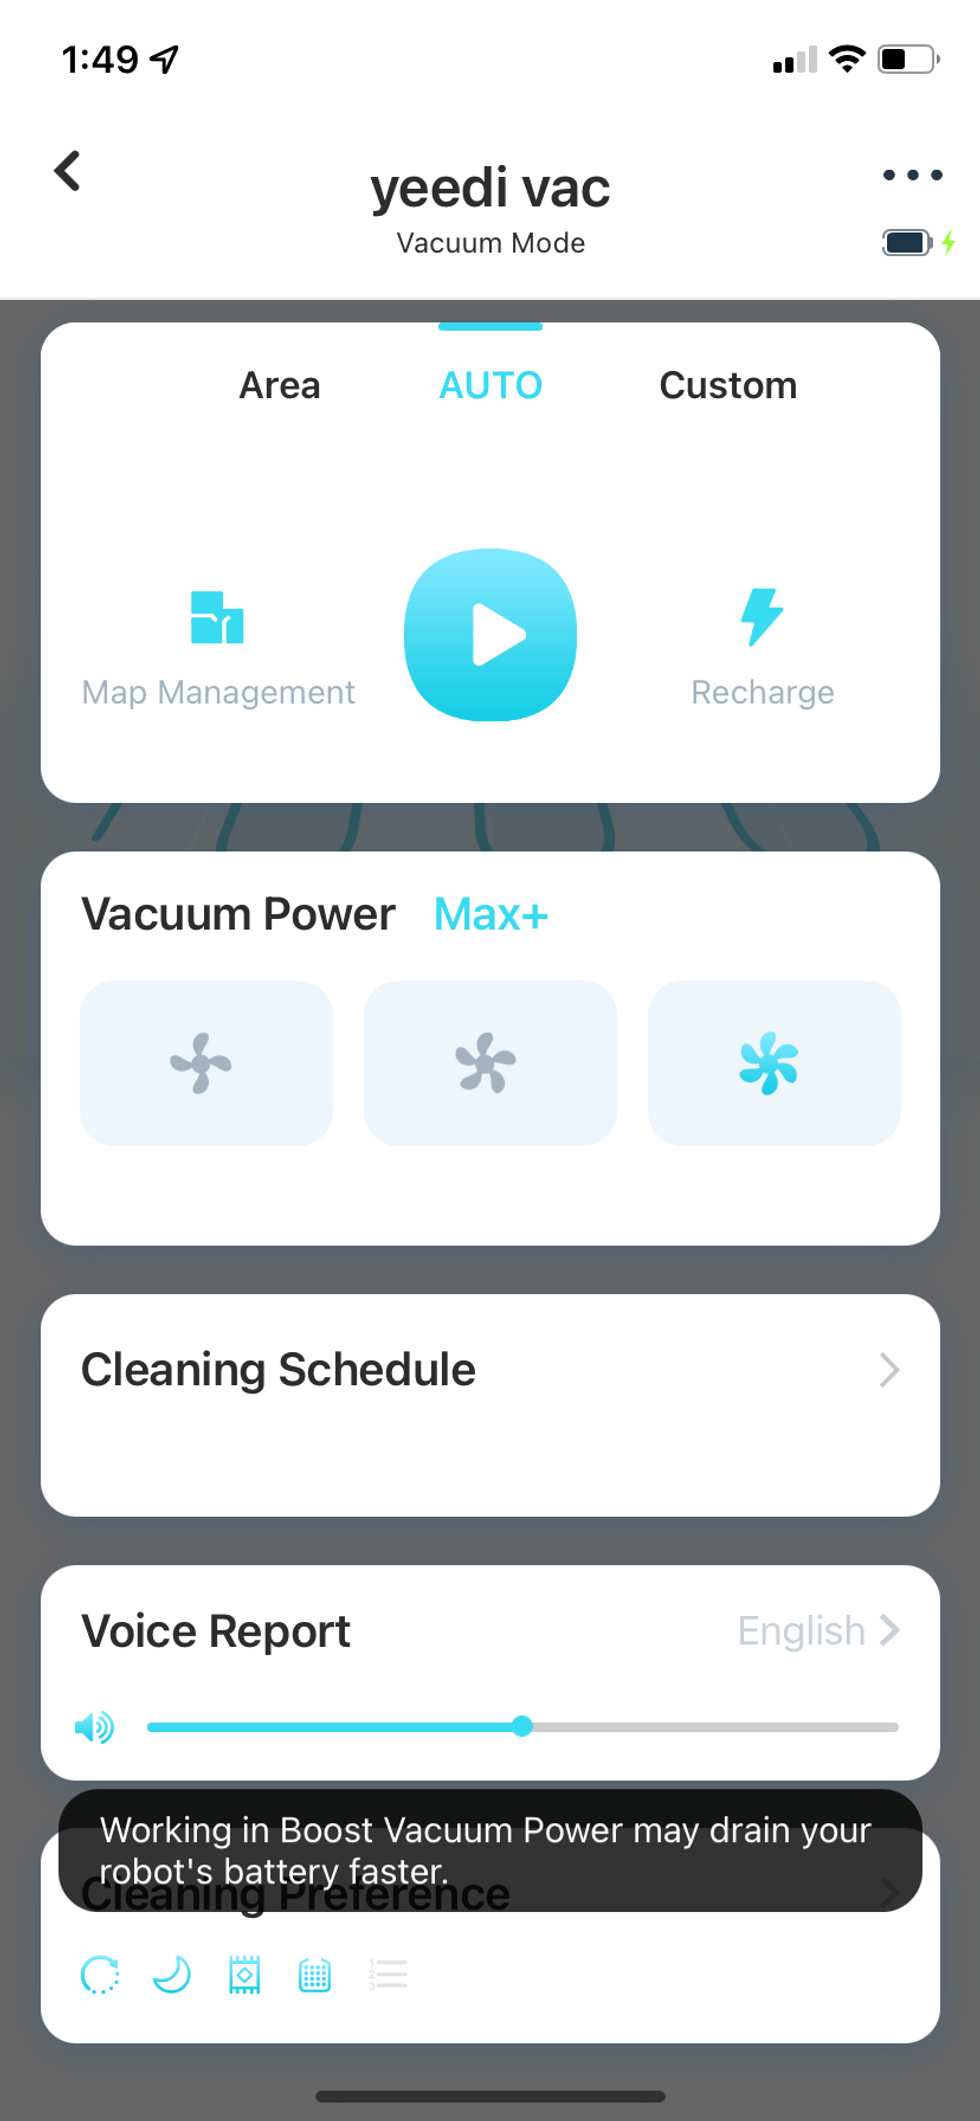 yeedi app showing cleaning schedules